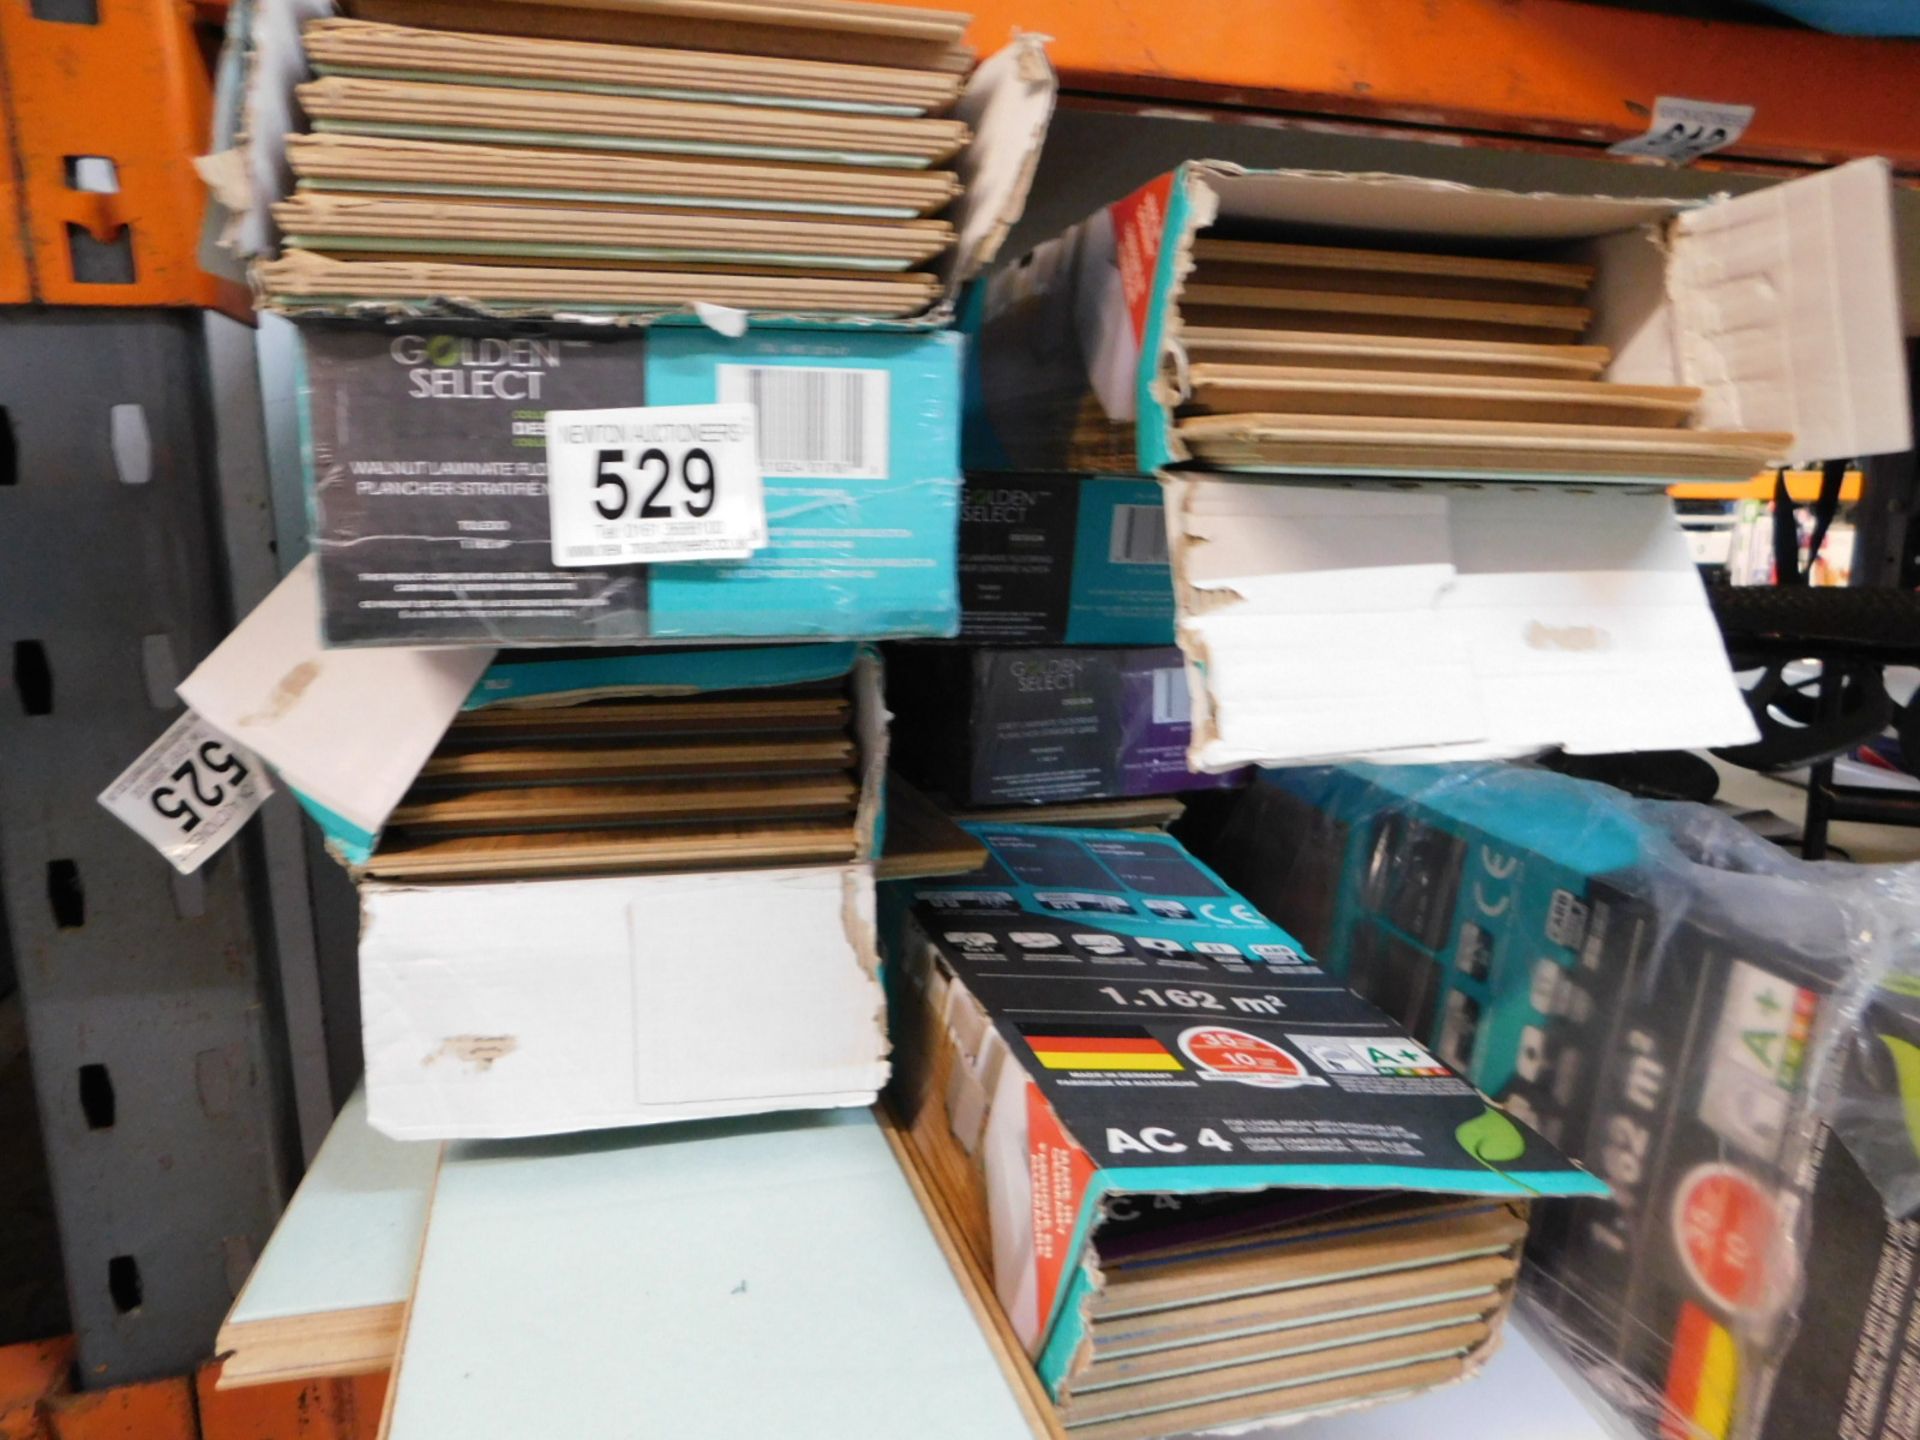 16 BOXES WORTH OF GOLDEN SELECT LAMINATE FLOORING IN TOLEDO (12) AND PROVIDENCE (4) COLOUR (COVERS